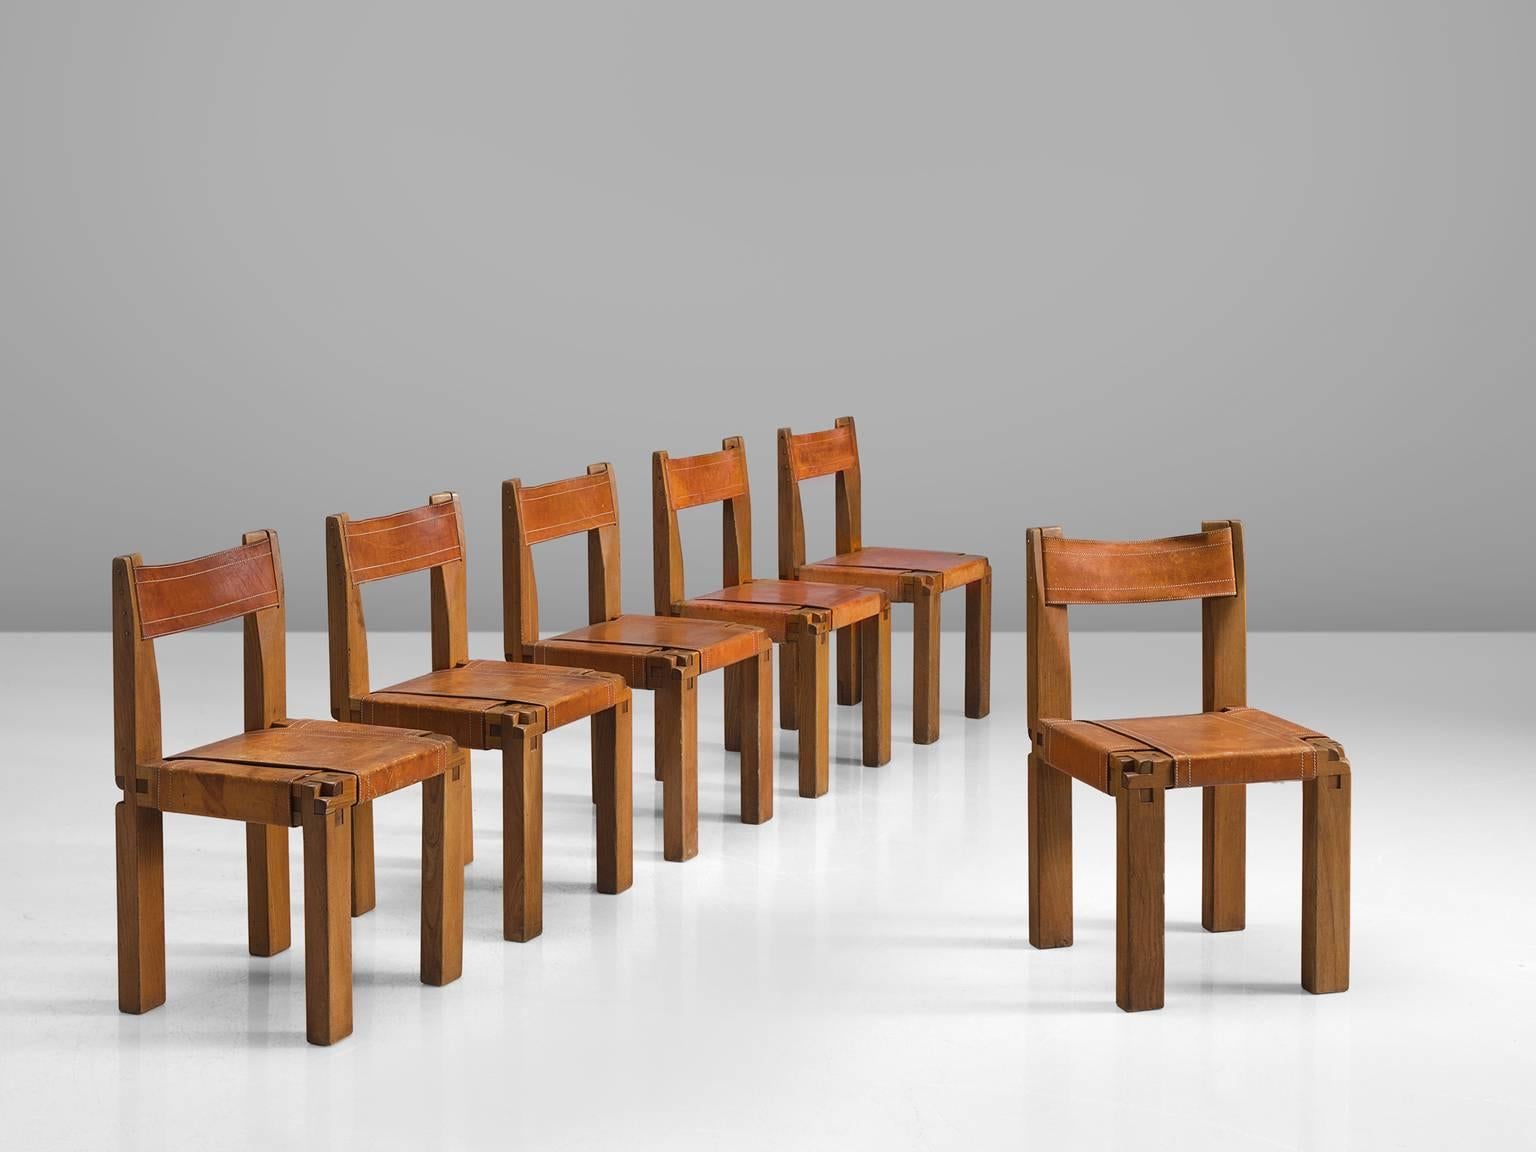 Pierre Chapo, set of six dining chairs, model S11, in elm and leather by France, circa 1955.

Large set of six chairs in solid elmwood with saddle leather seating and back. Designed by French designer Pierre Chapo for Atelier Chapo, Paris. These